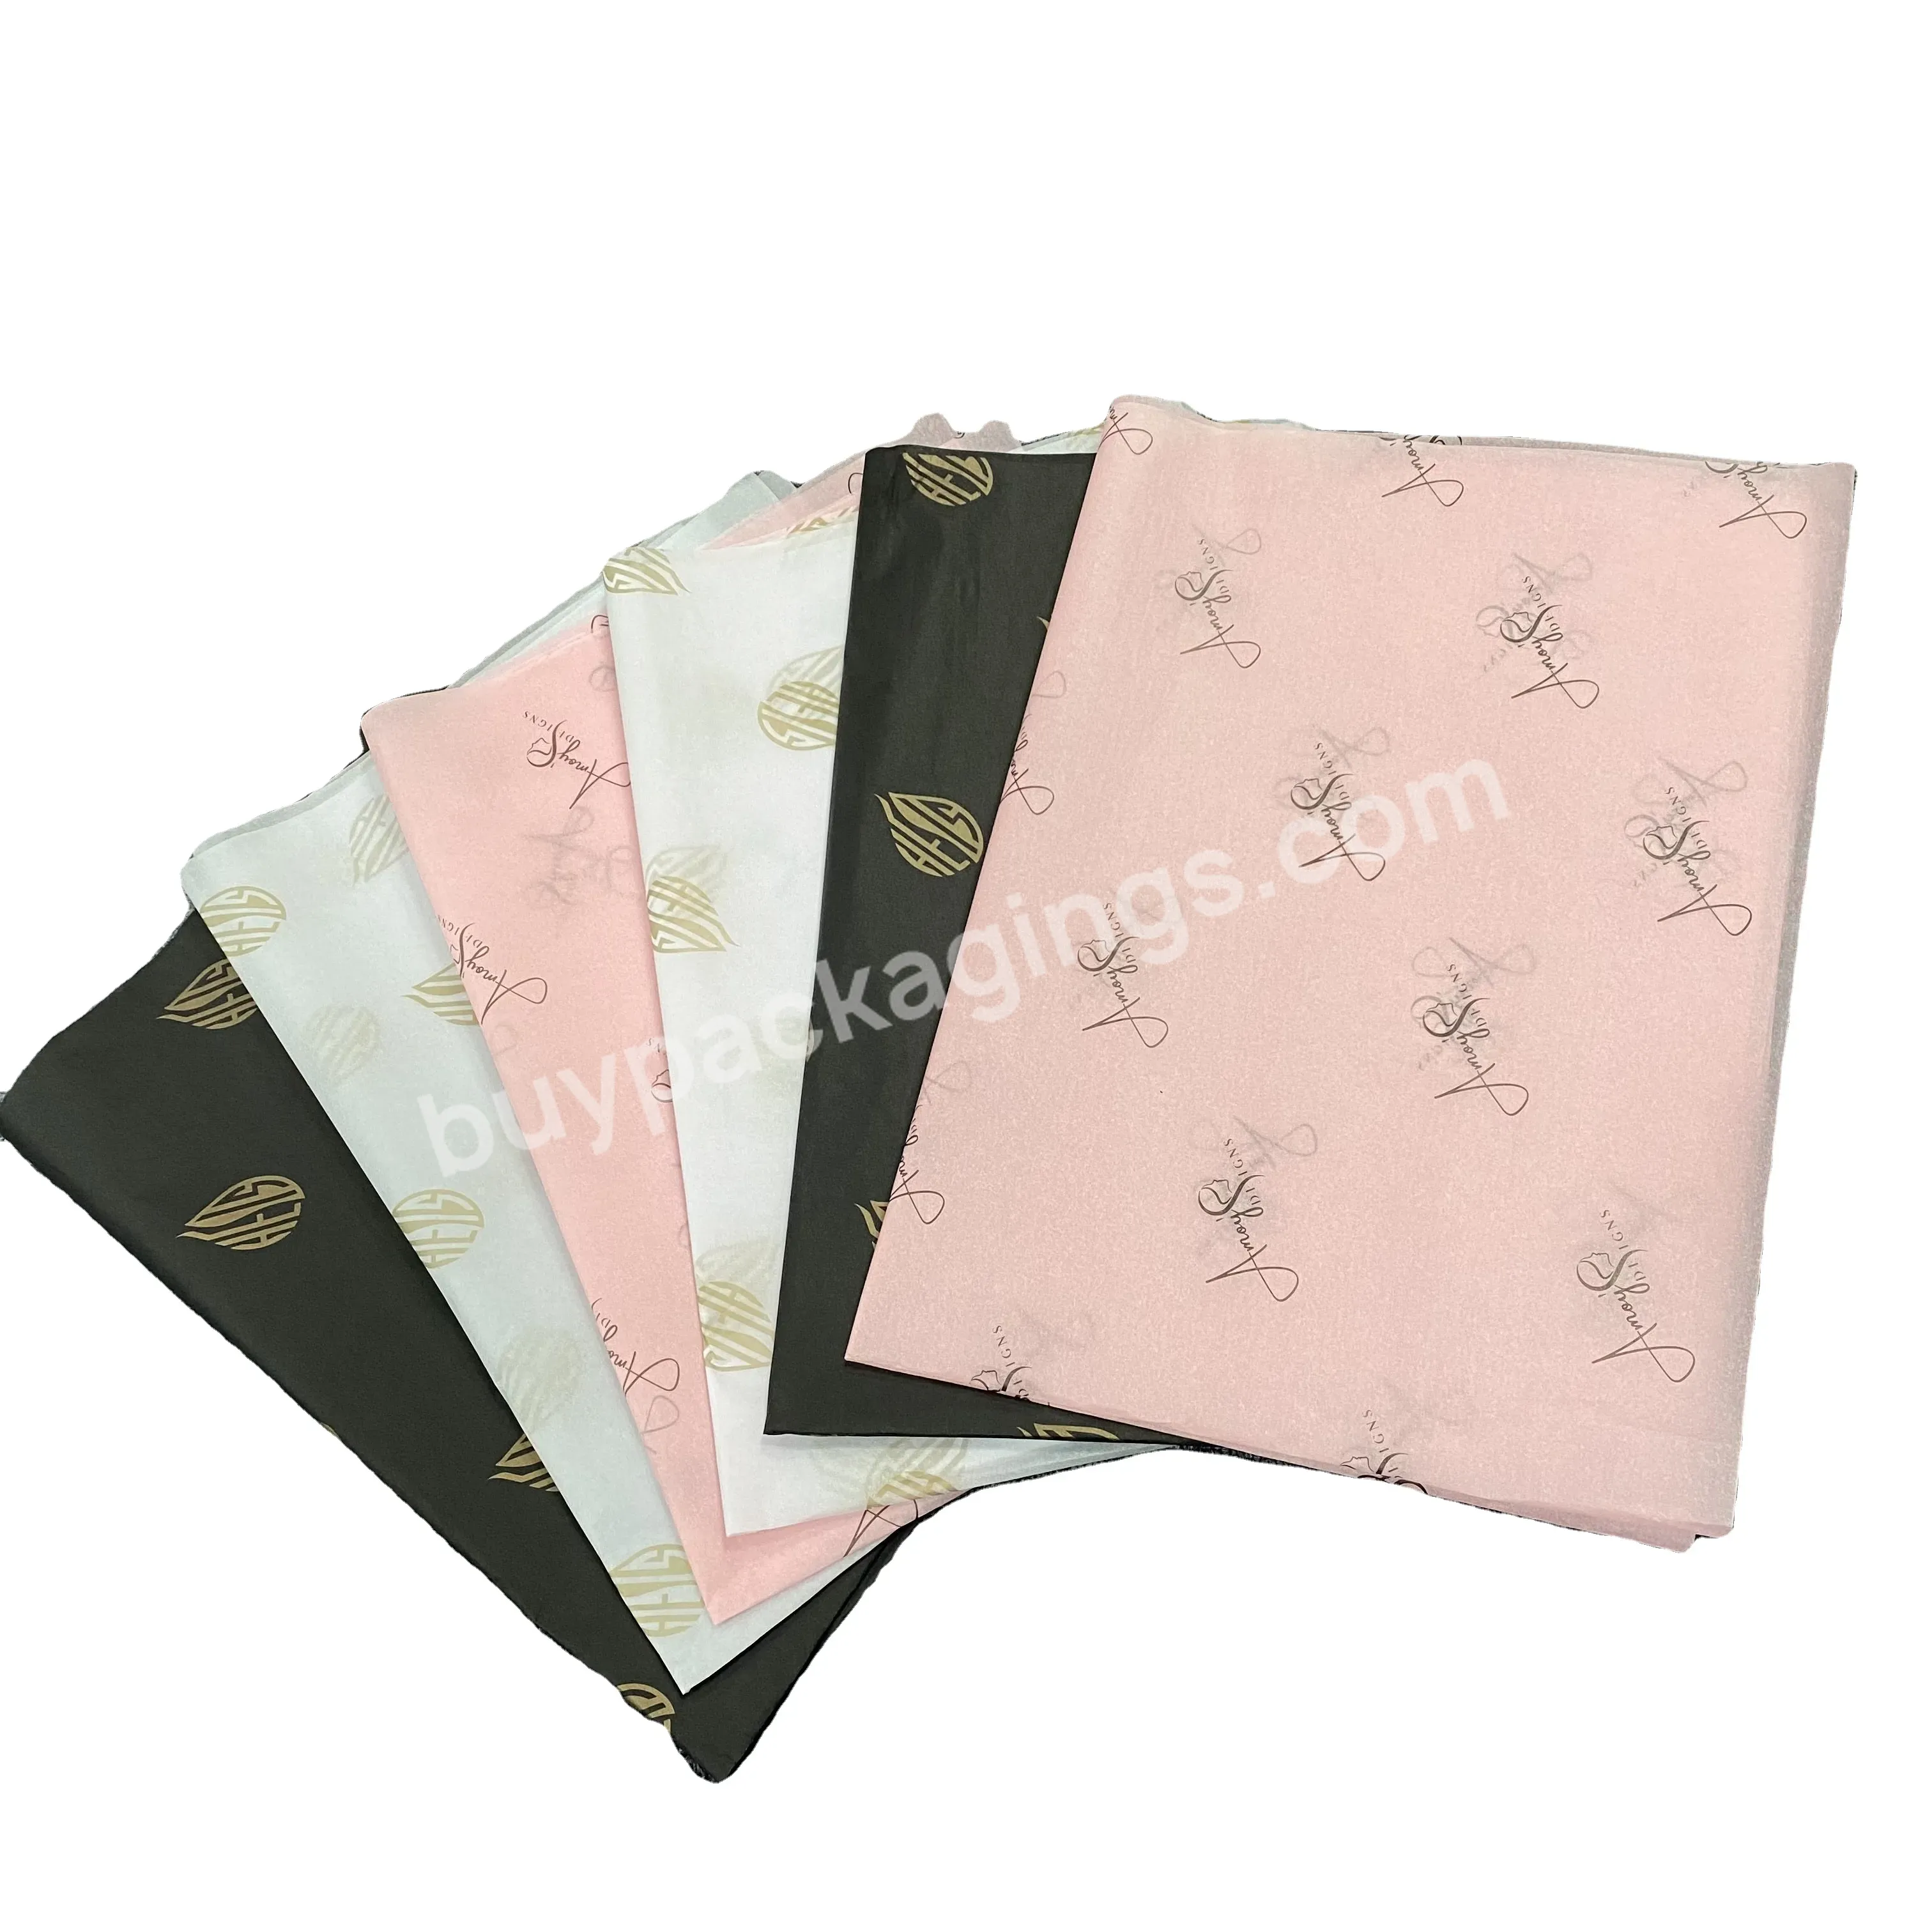 Beautiful Design High Level Low Moq 17g 50*70cm Wrapping Tissue Paper Custom Size Logo Print Gift Packaging With Brand - Buy Low Moq 17g 50*70cm Wrapping Tissue Paper,Customize Any Size Logo Print,Gift Packaging With Brand.